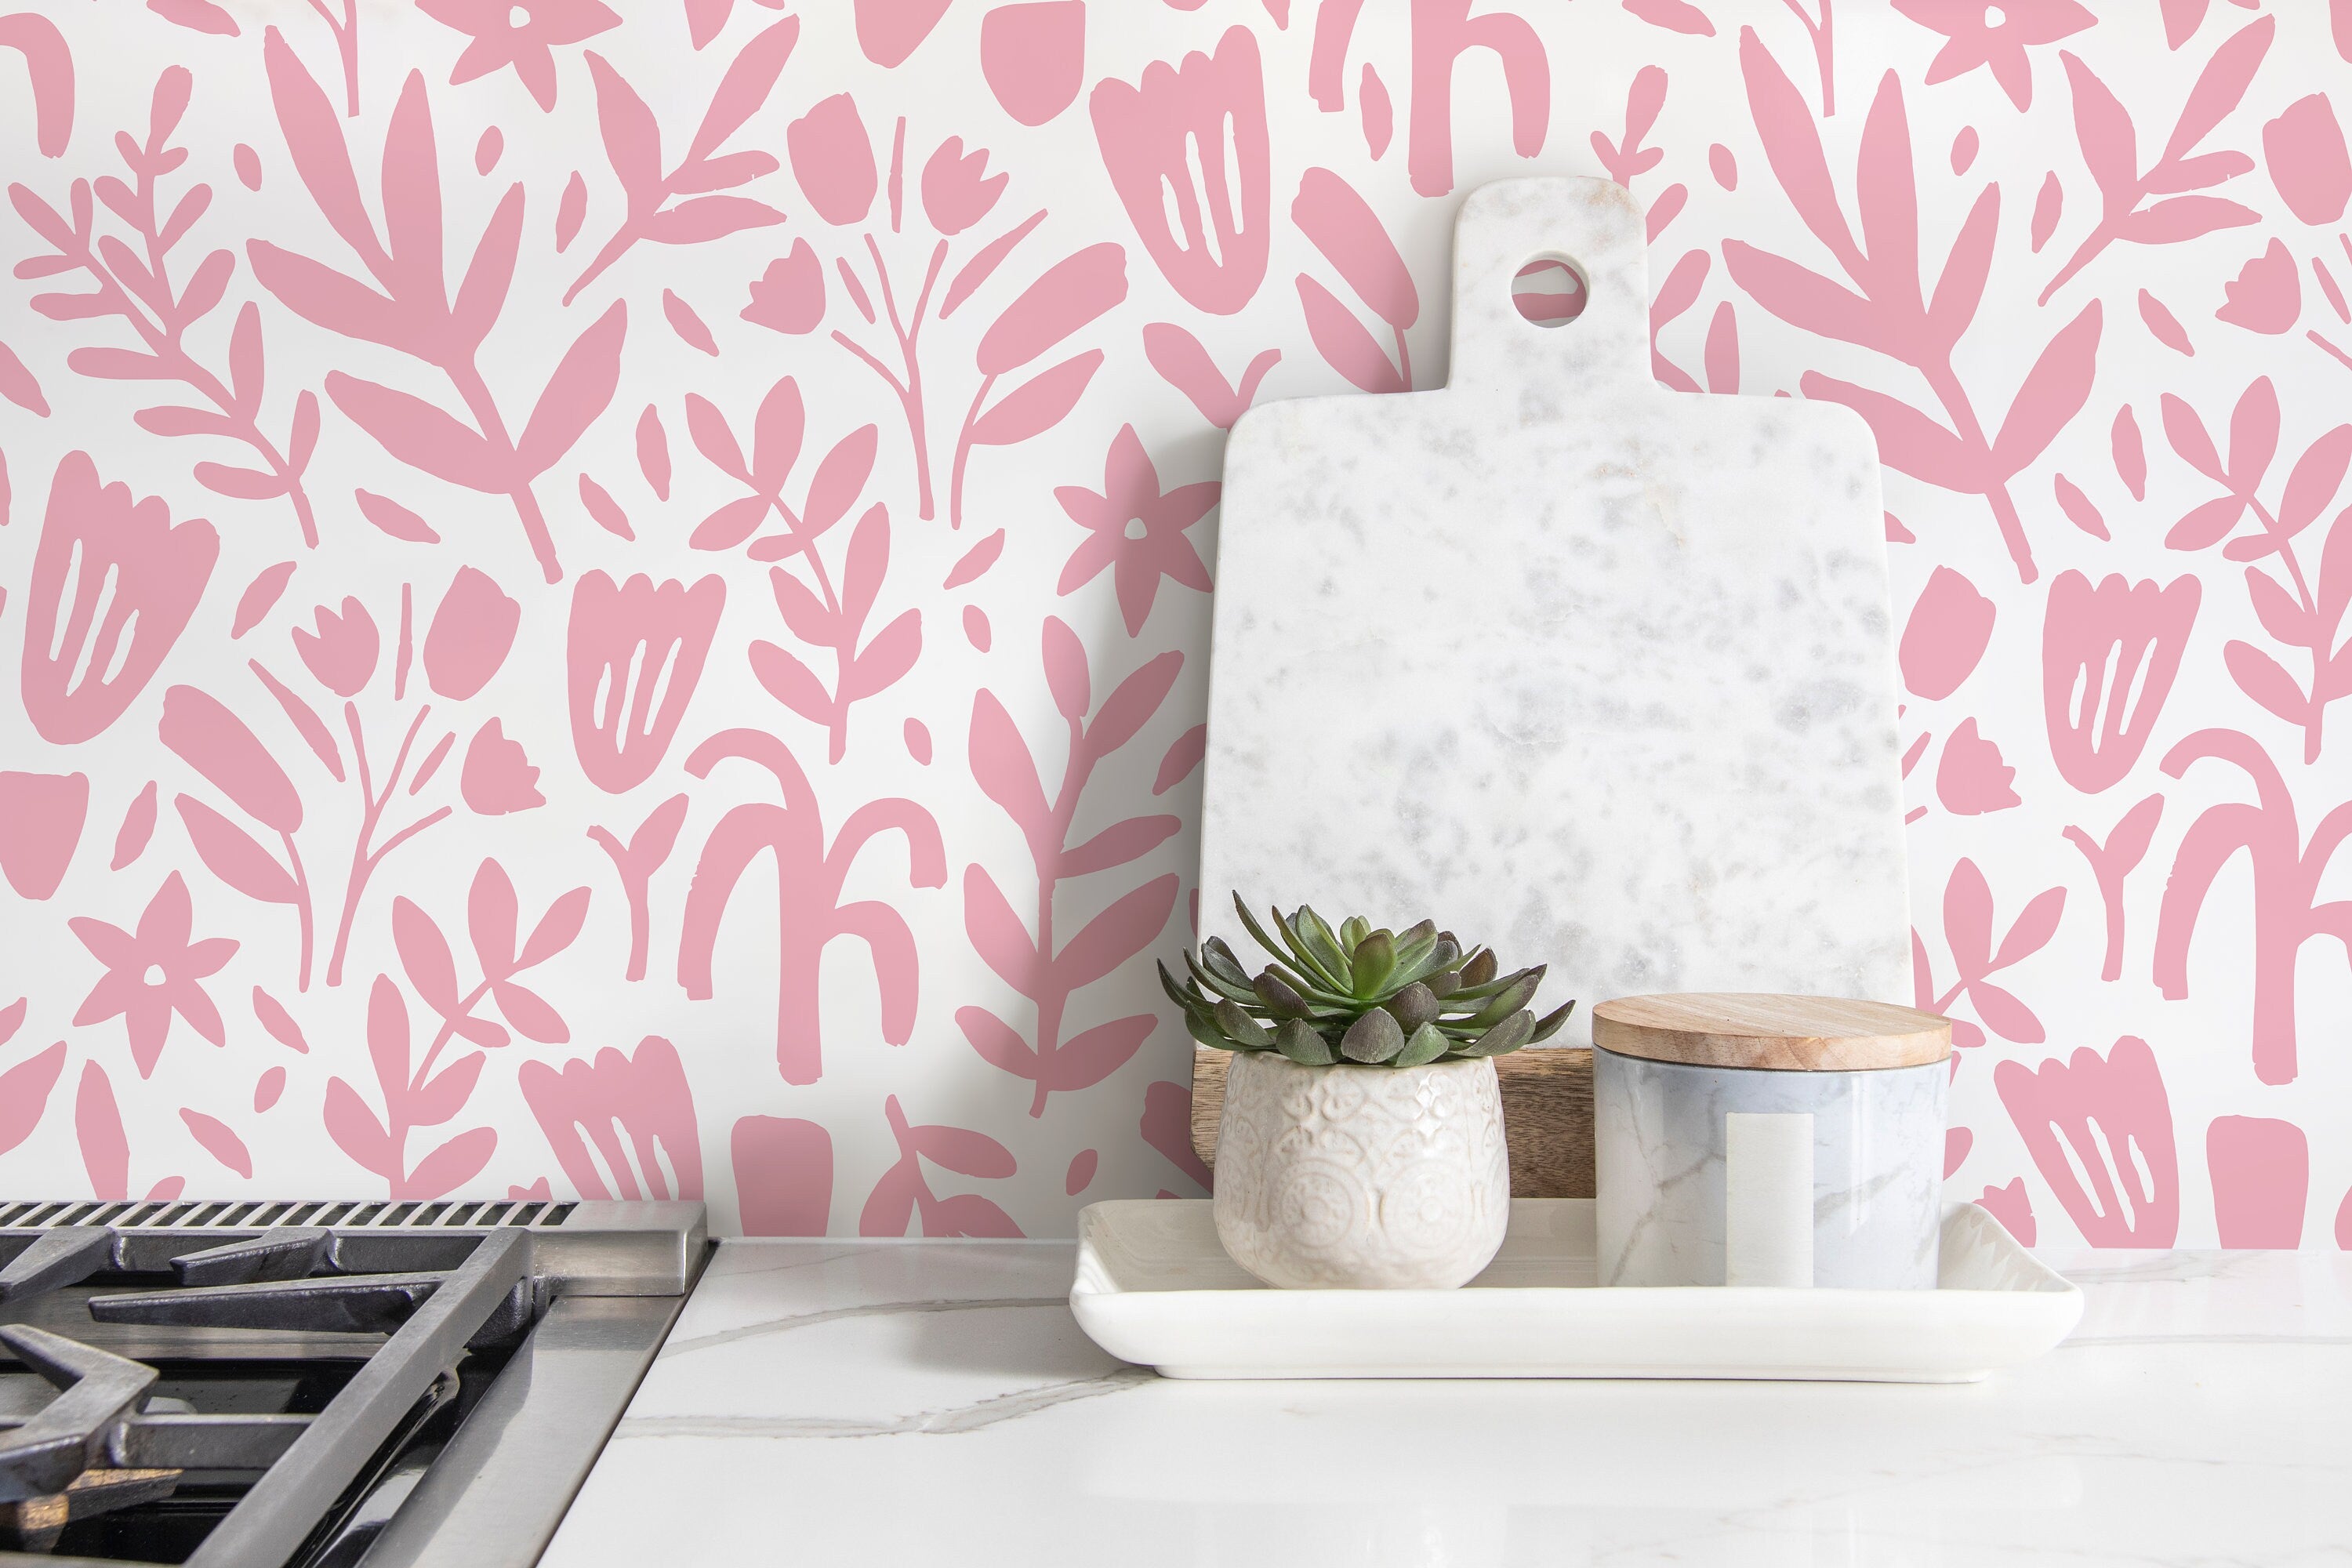 Cute Pink Floral Wallpaper / Peel and Stick Wallpaper Removable